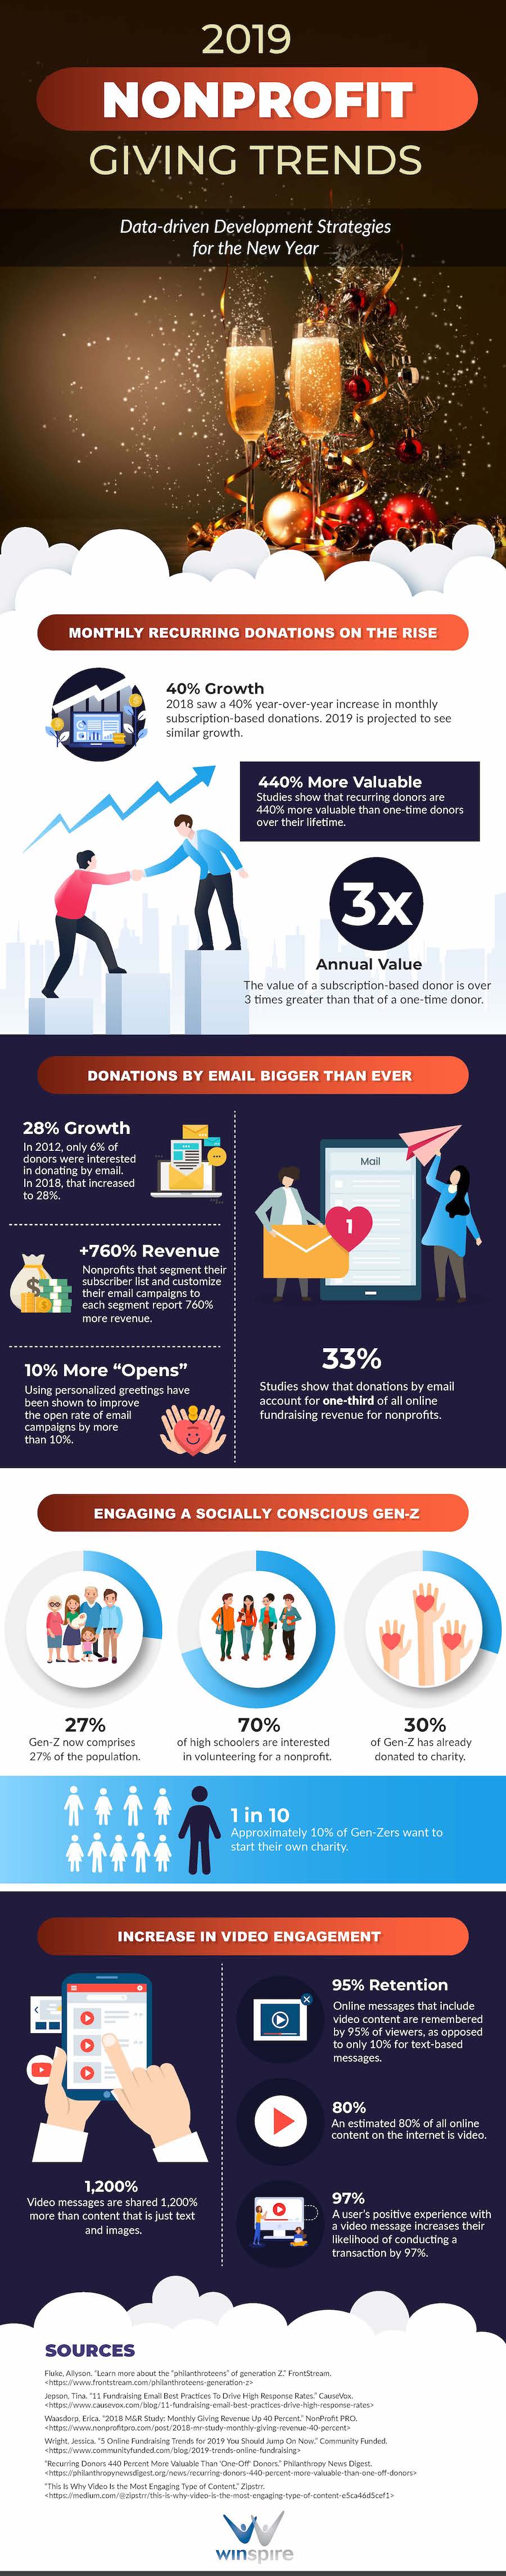 Nonprofit Giving Trends 2019 - Winspire Infographic